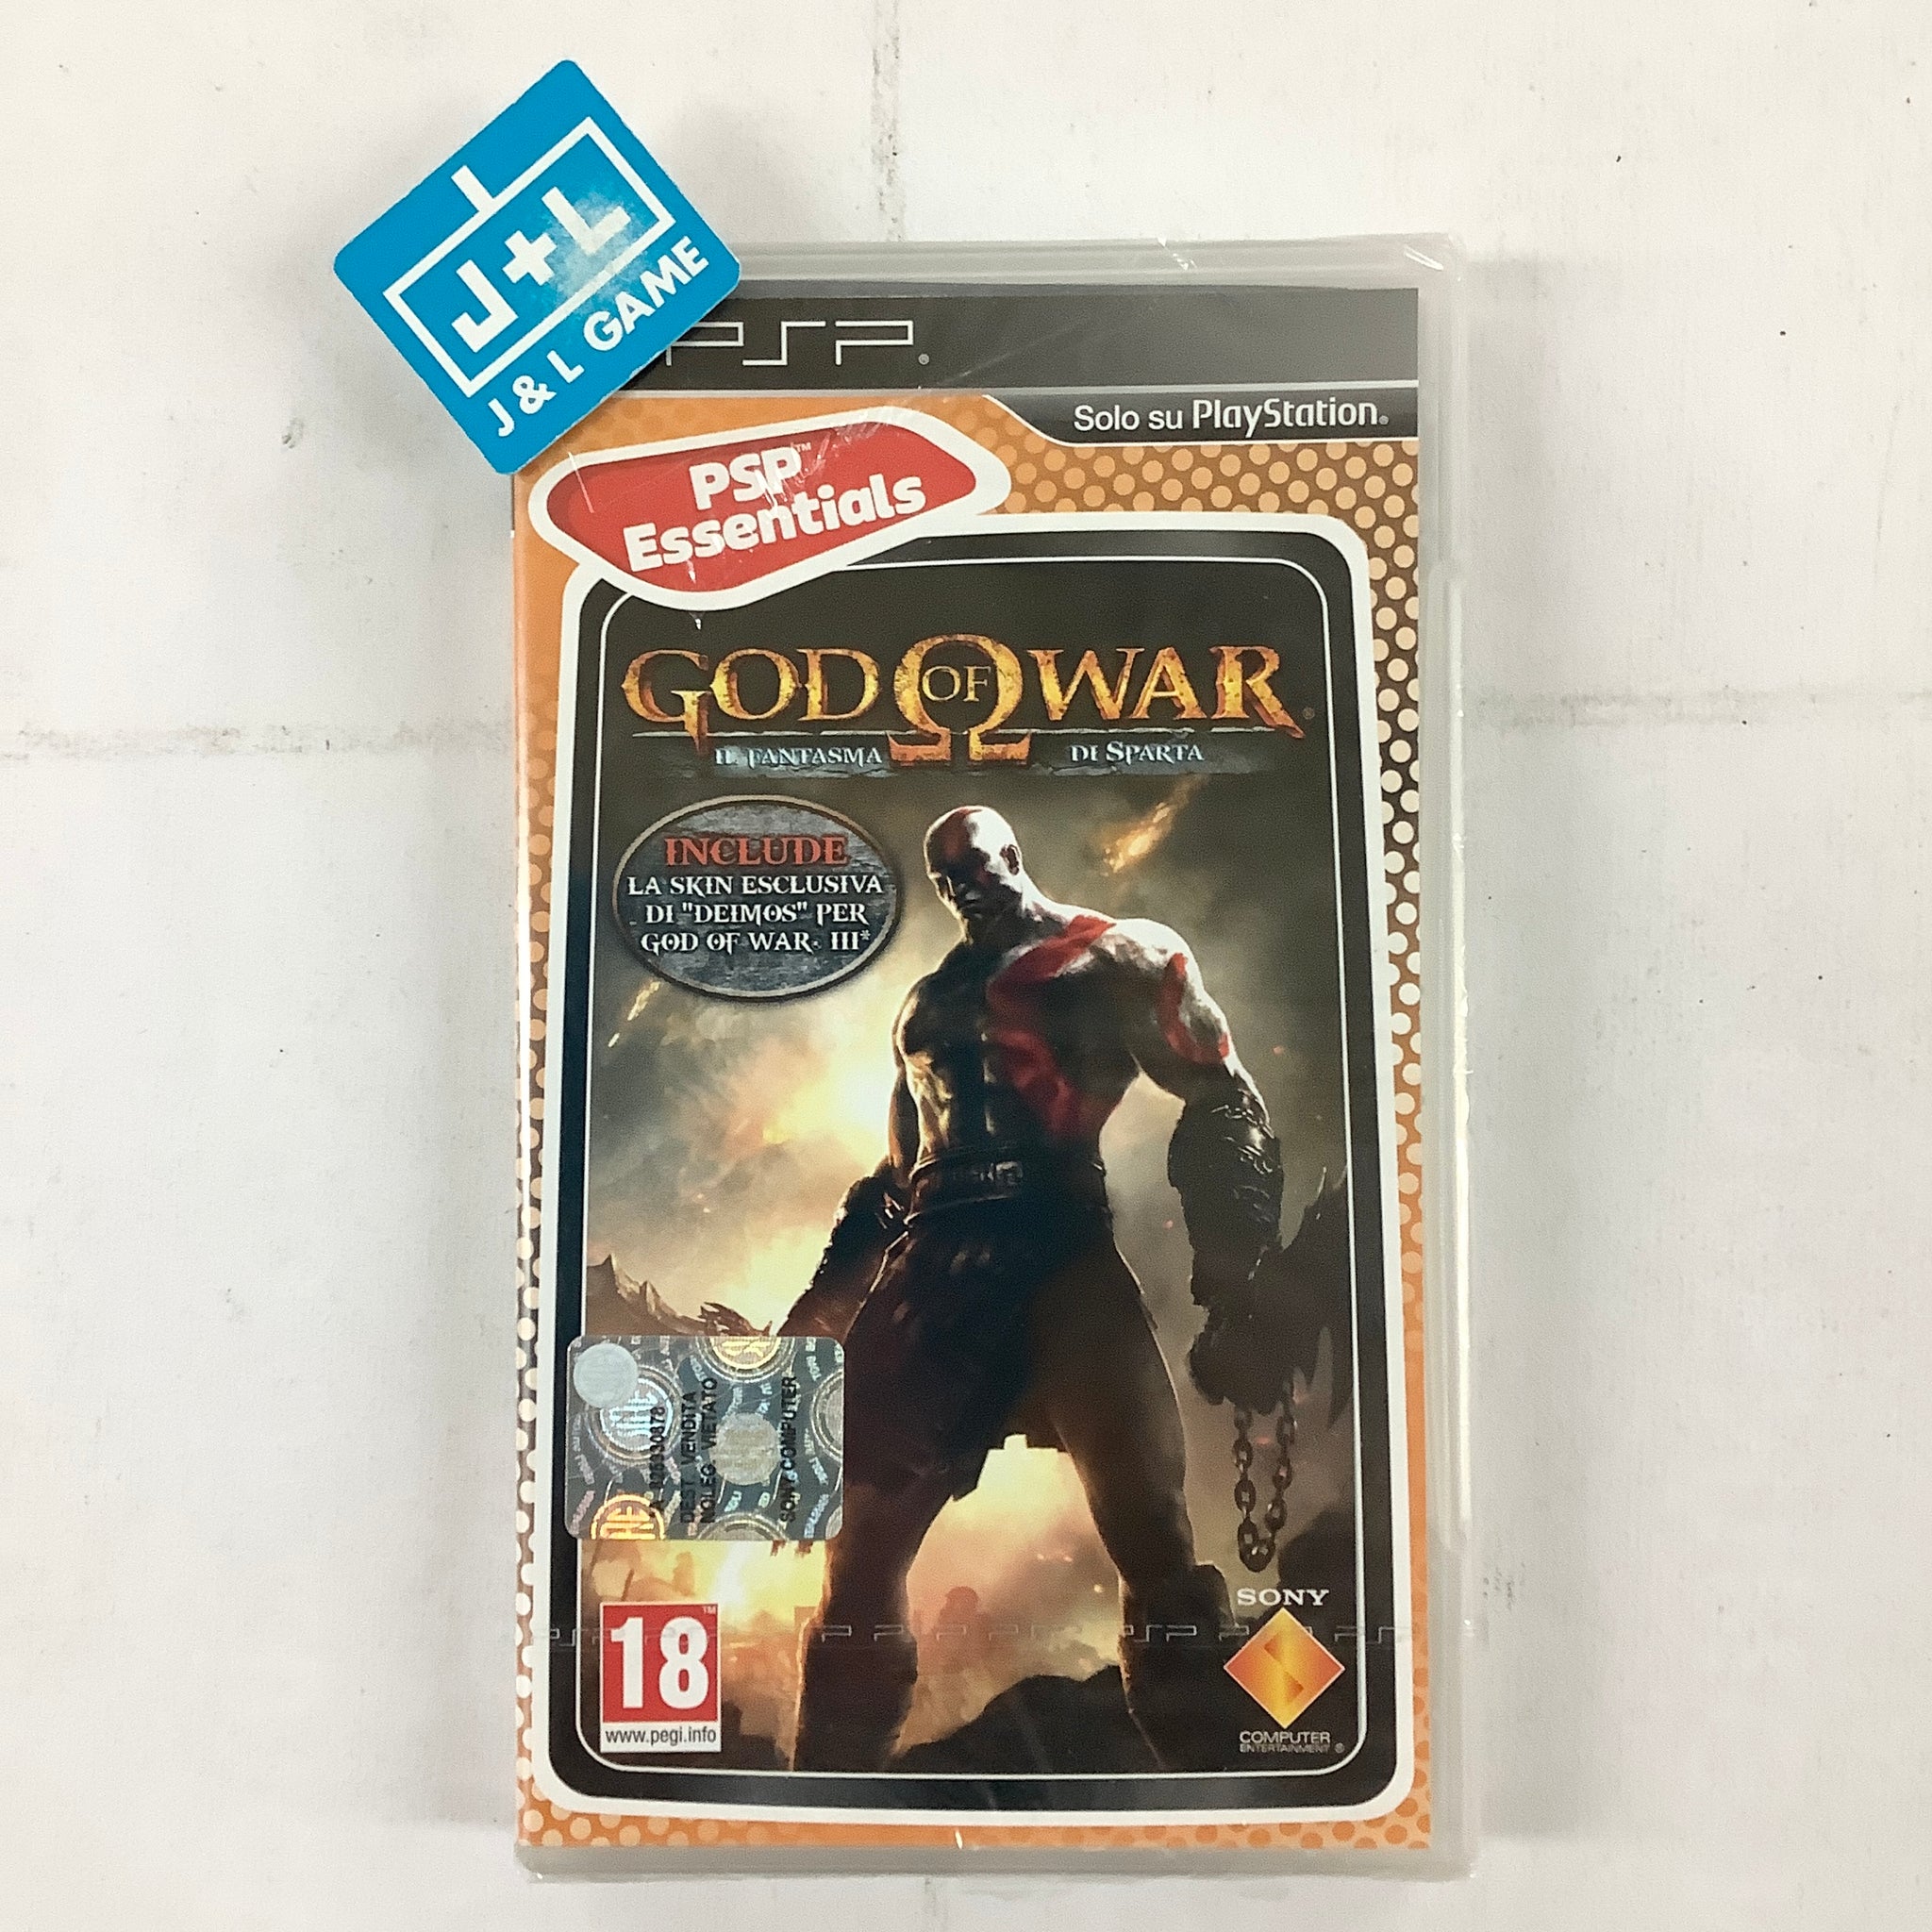 God of War: Ghost of Sparta - Sony PSP (European Import) – J&L Video Games  New York City